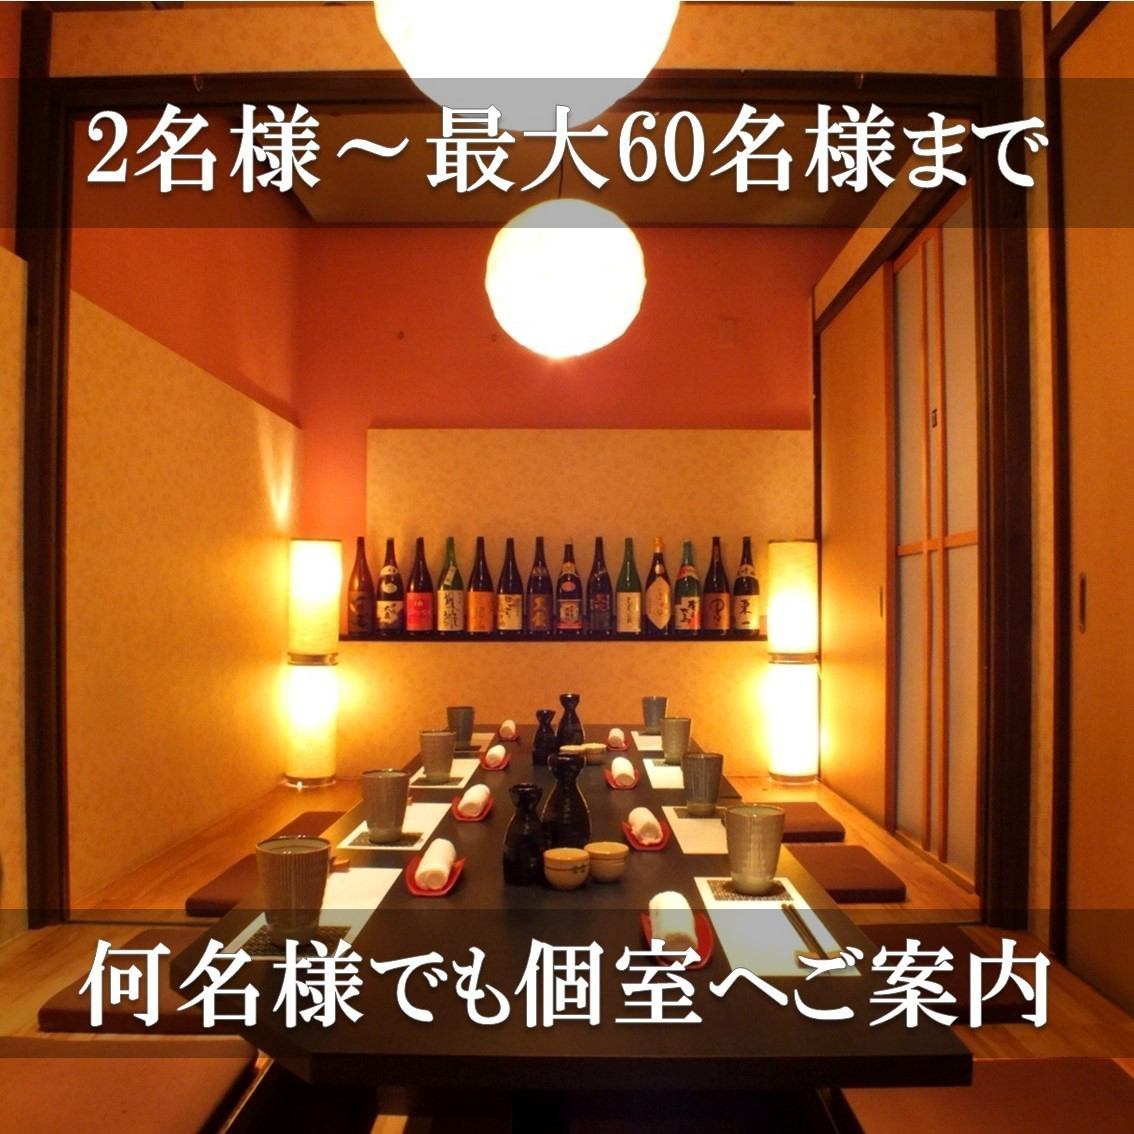 "After work!!" Even if it's not a course, it's OK!! 2 hours all-you-can-drink from 980 yen